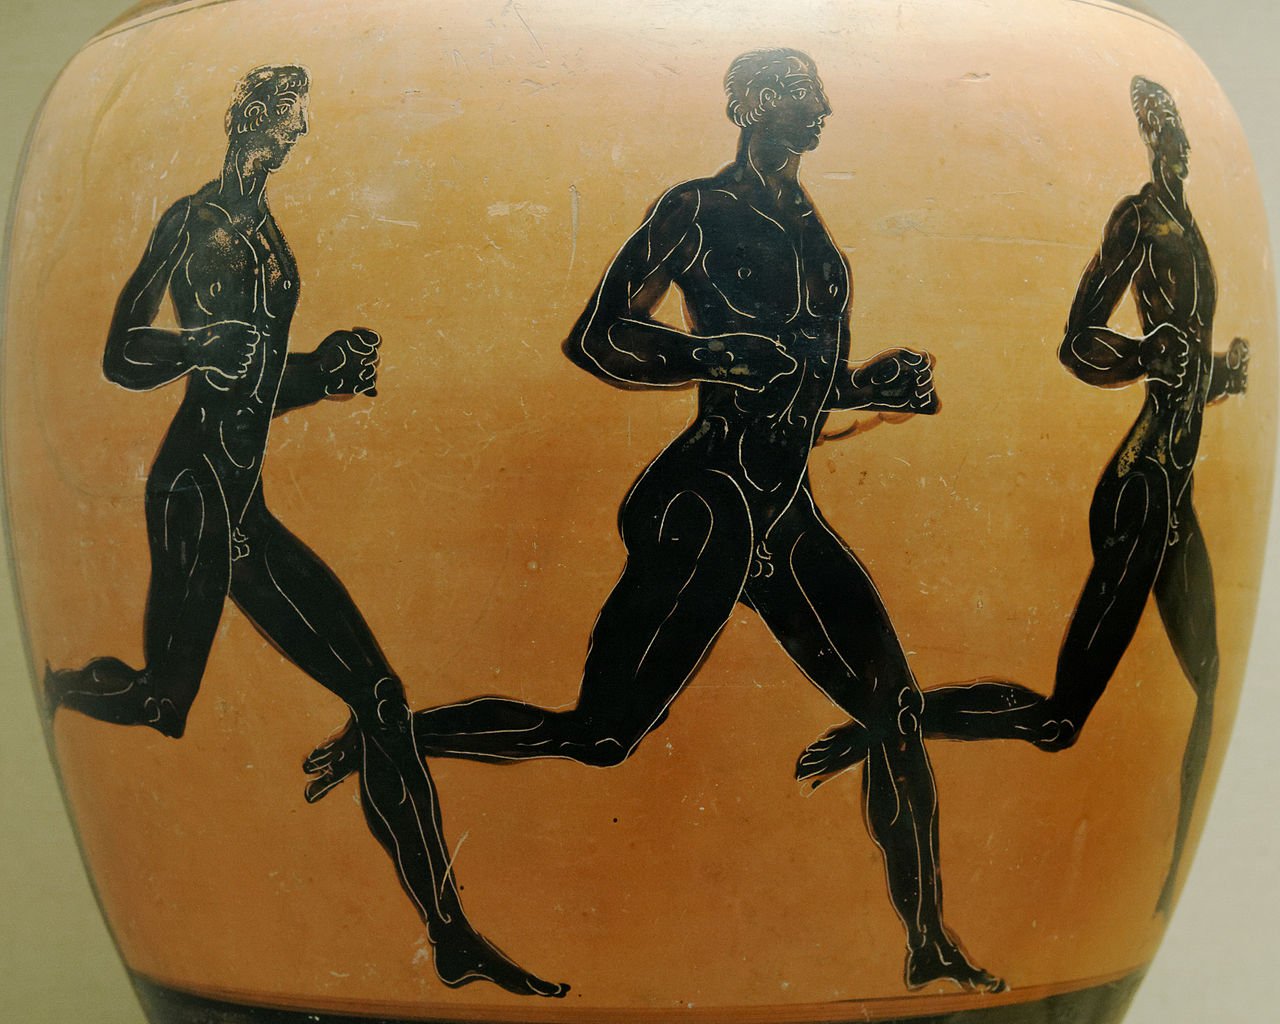 An pottery depicting three runners at the Olympic Games.